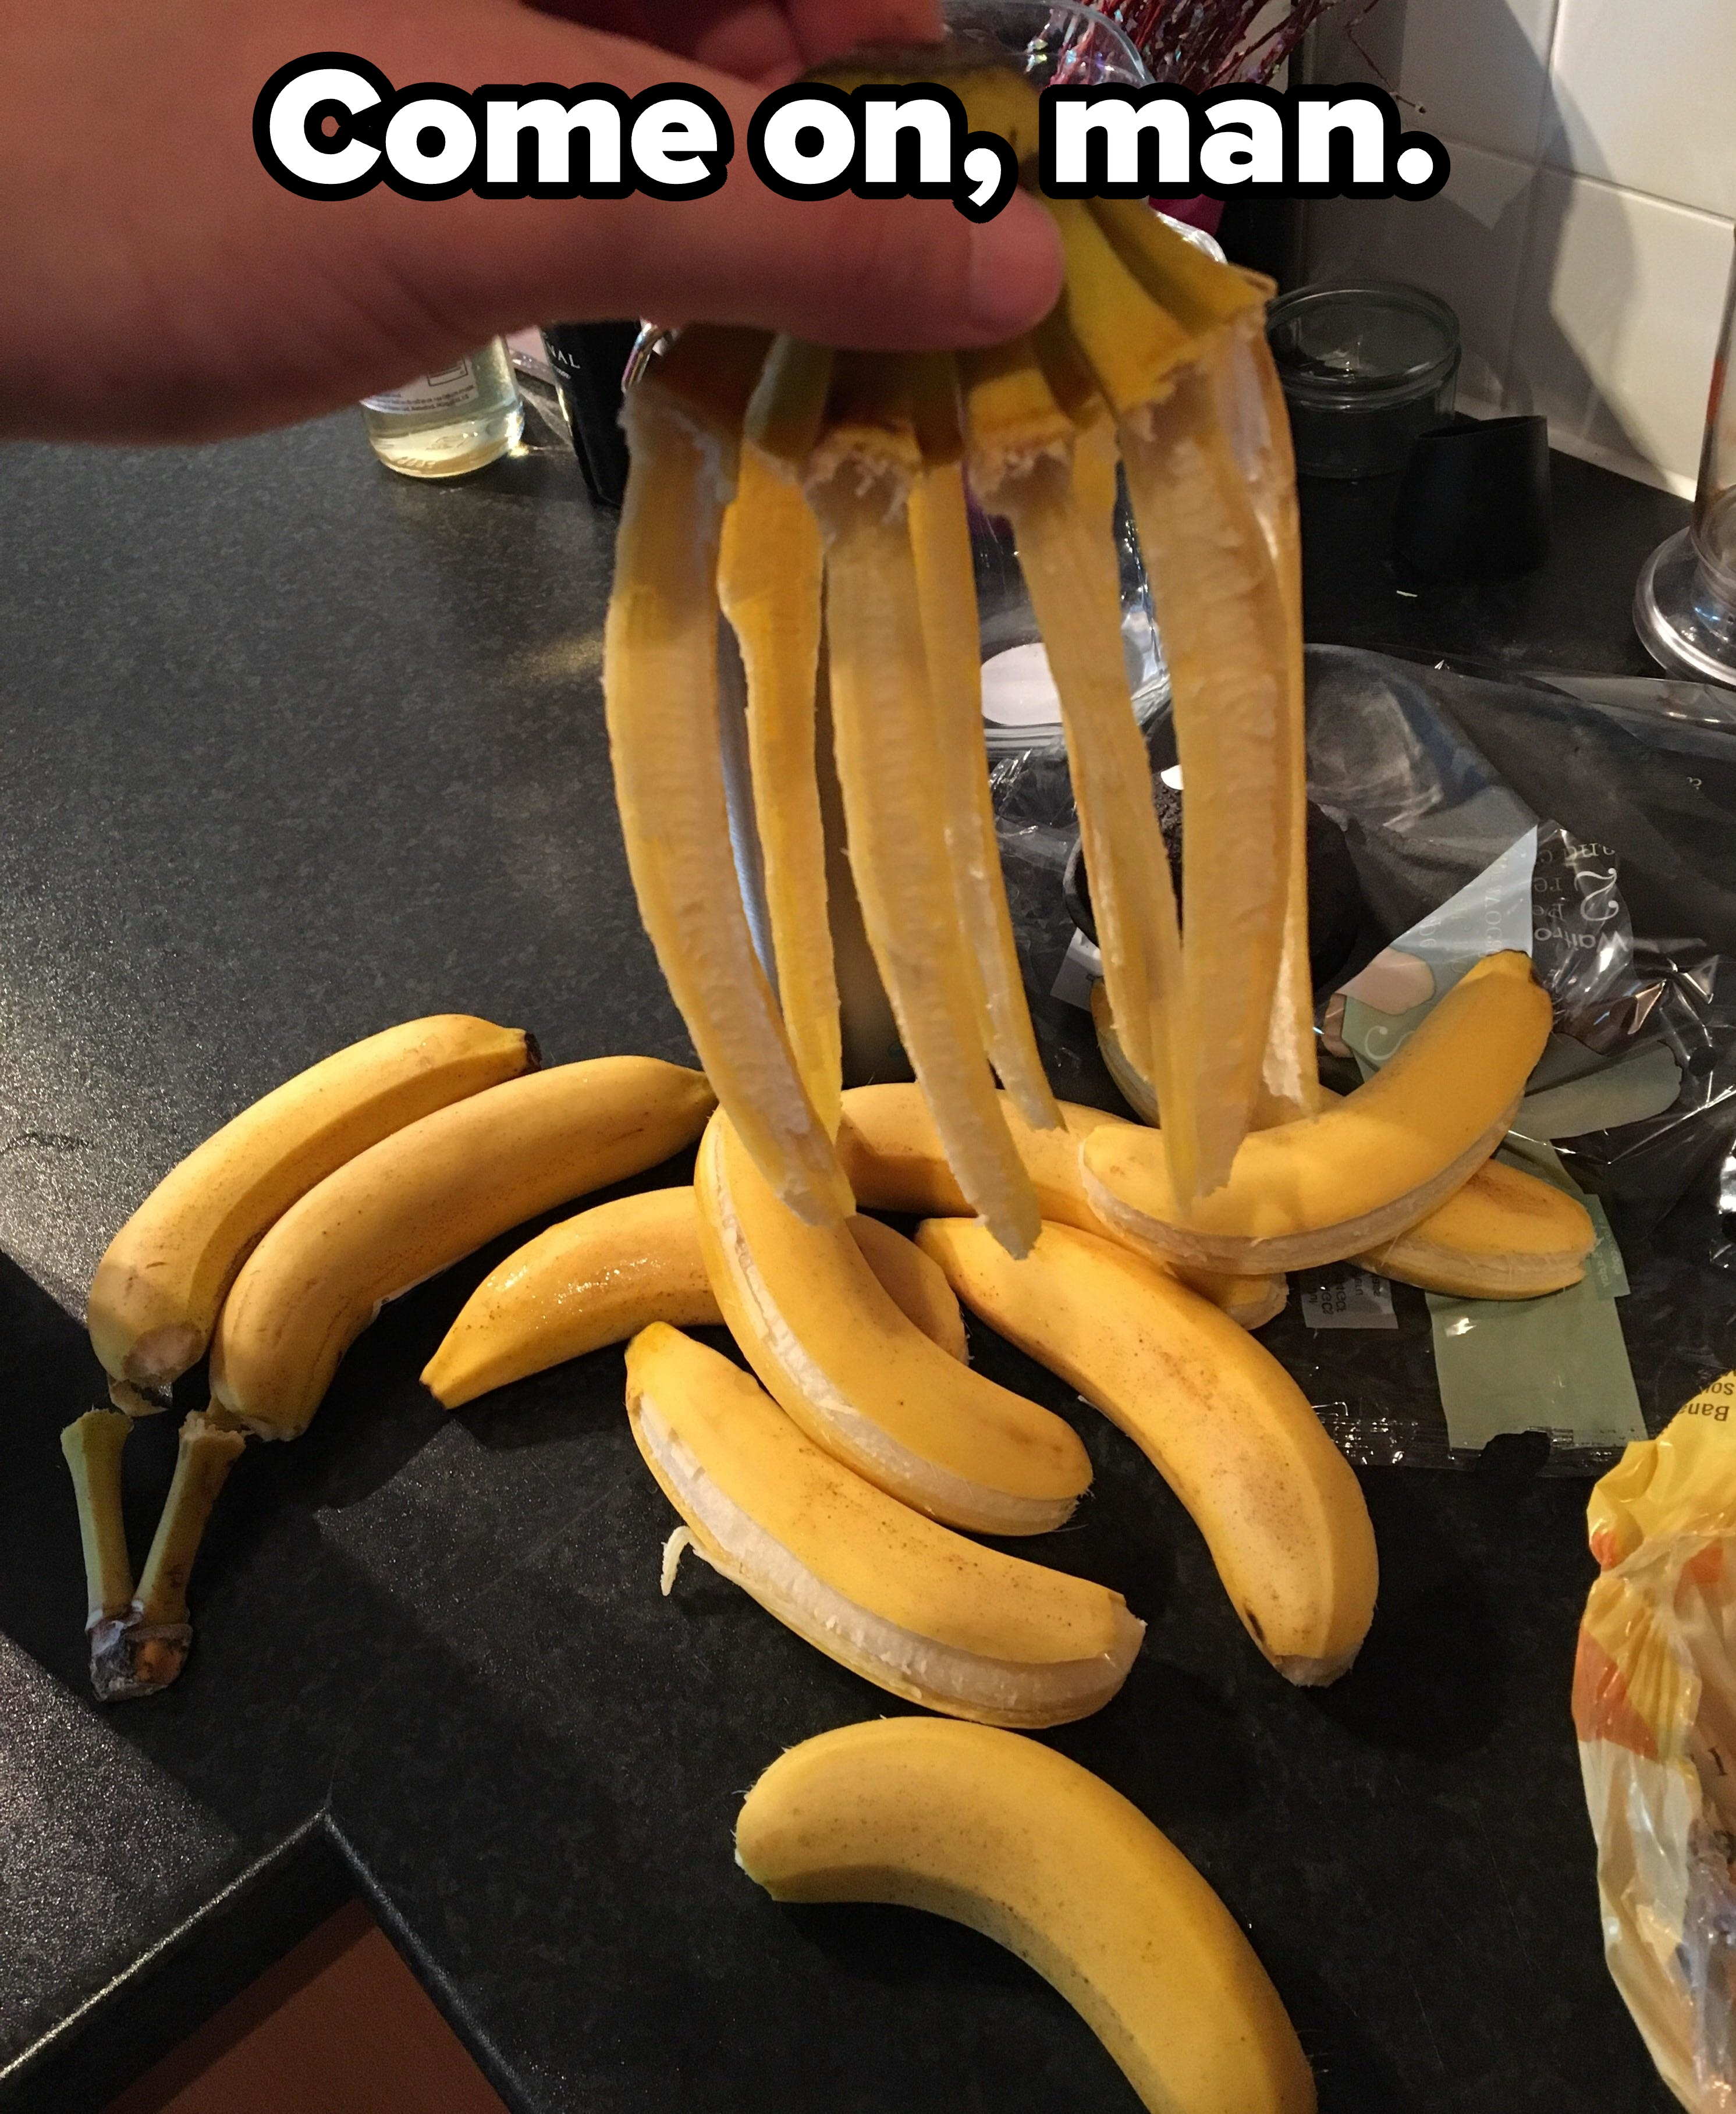 Each of the bananas in a hanging bunch is stripped of one part of its peel and falls to the counter surface